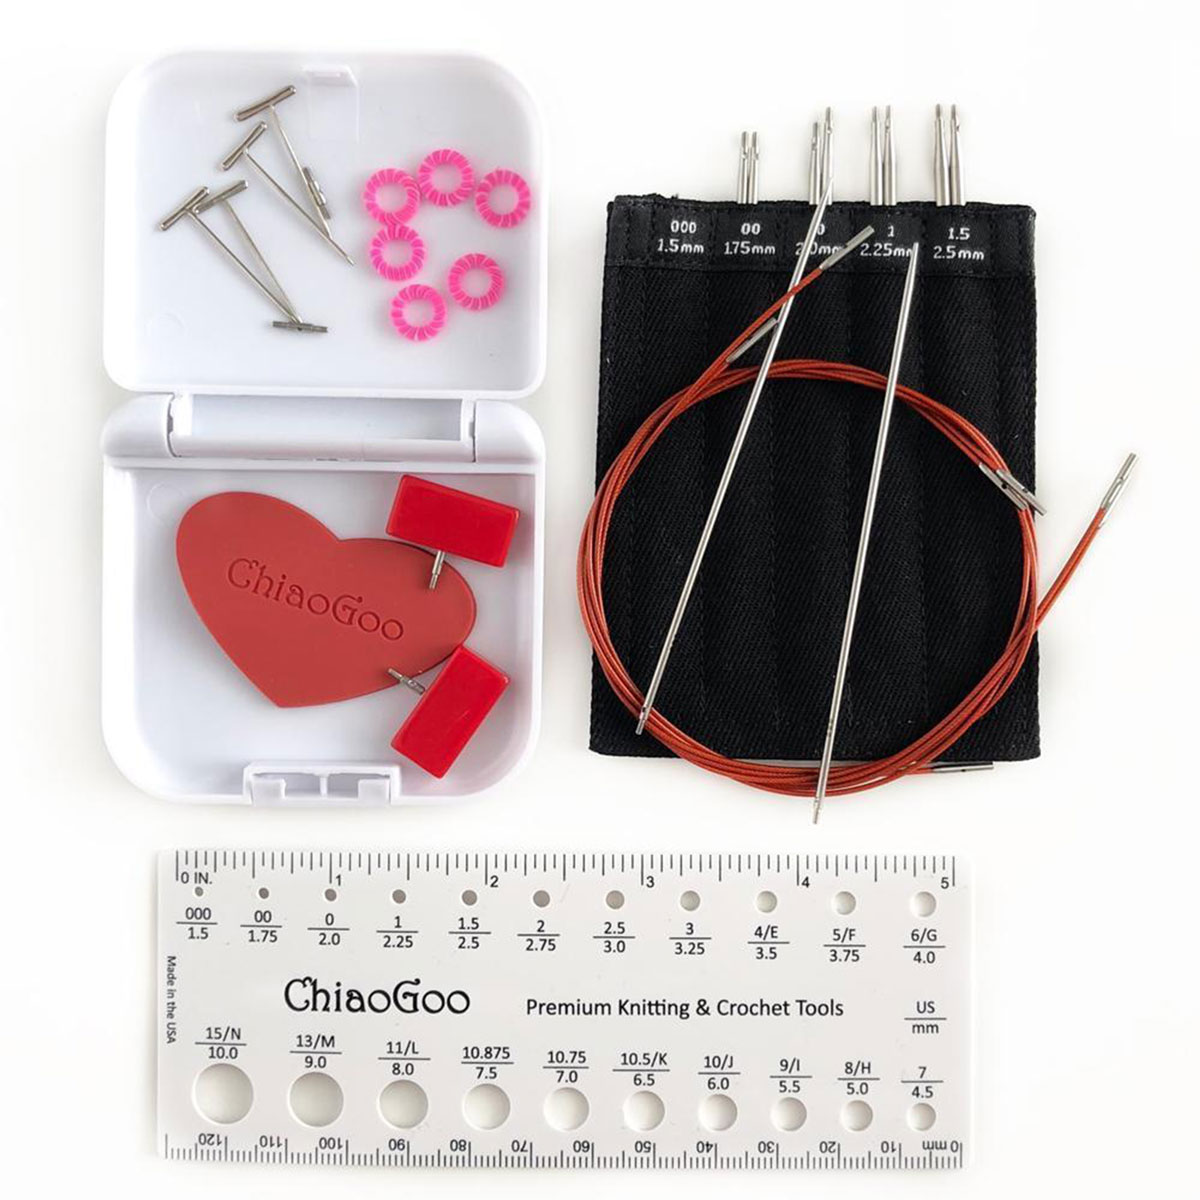 ChiaoGoo TWIST 5 inch Red Lace Complete (US 2 - US 15) Interchangeable  Knitting Set